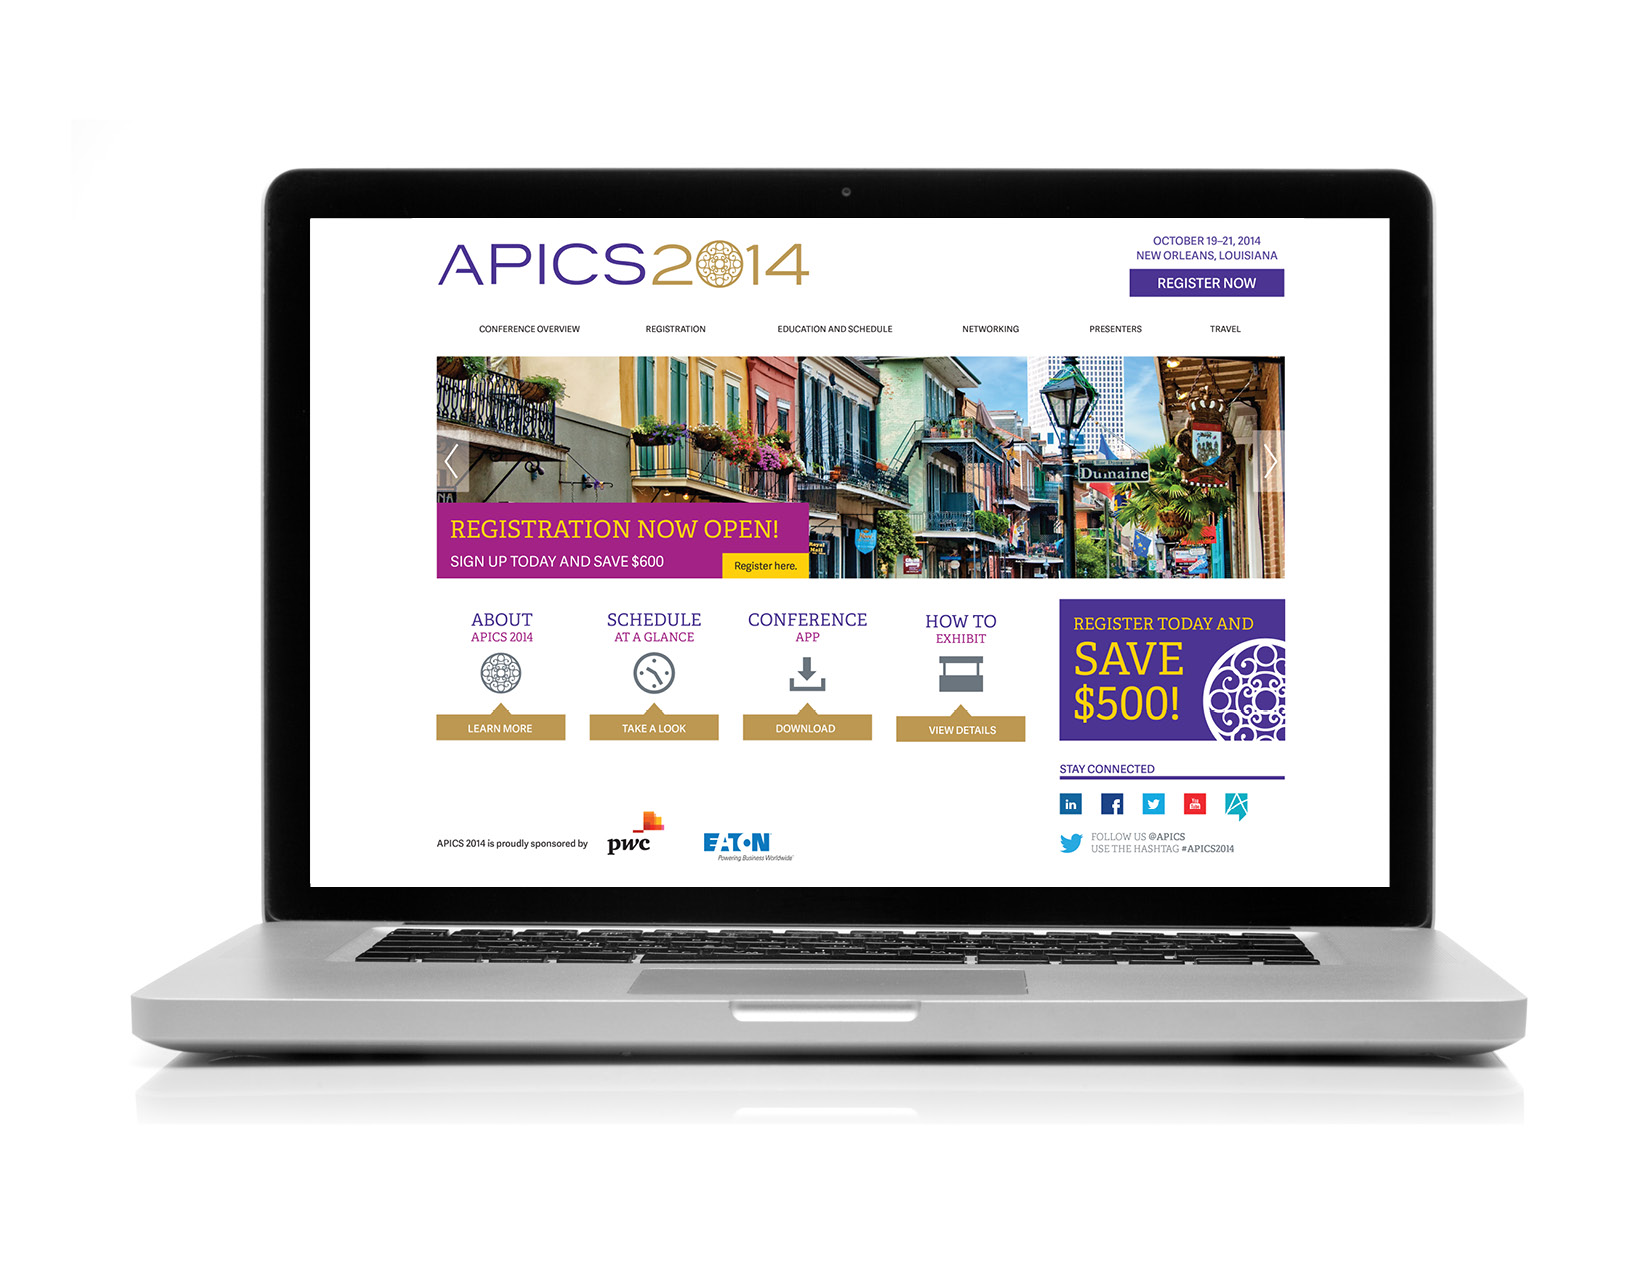  Microsite for APICS 2014, which will take place in New Orleans. 